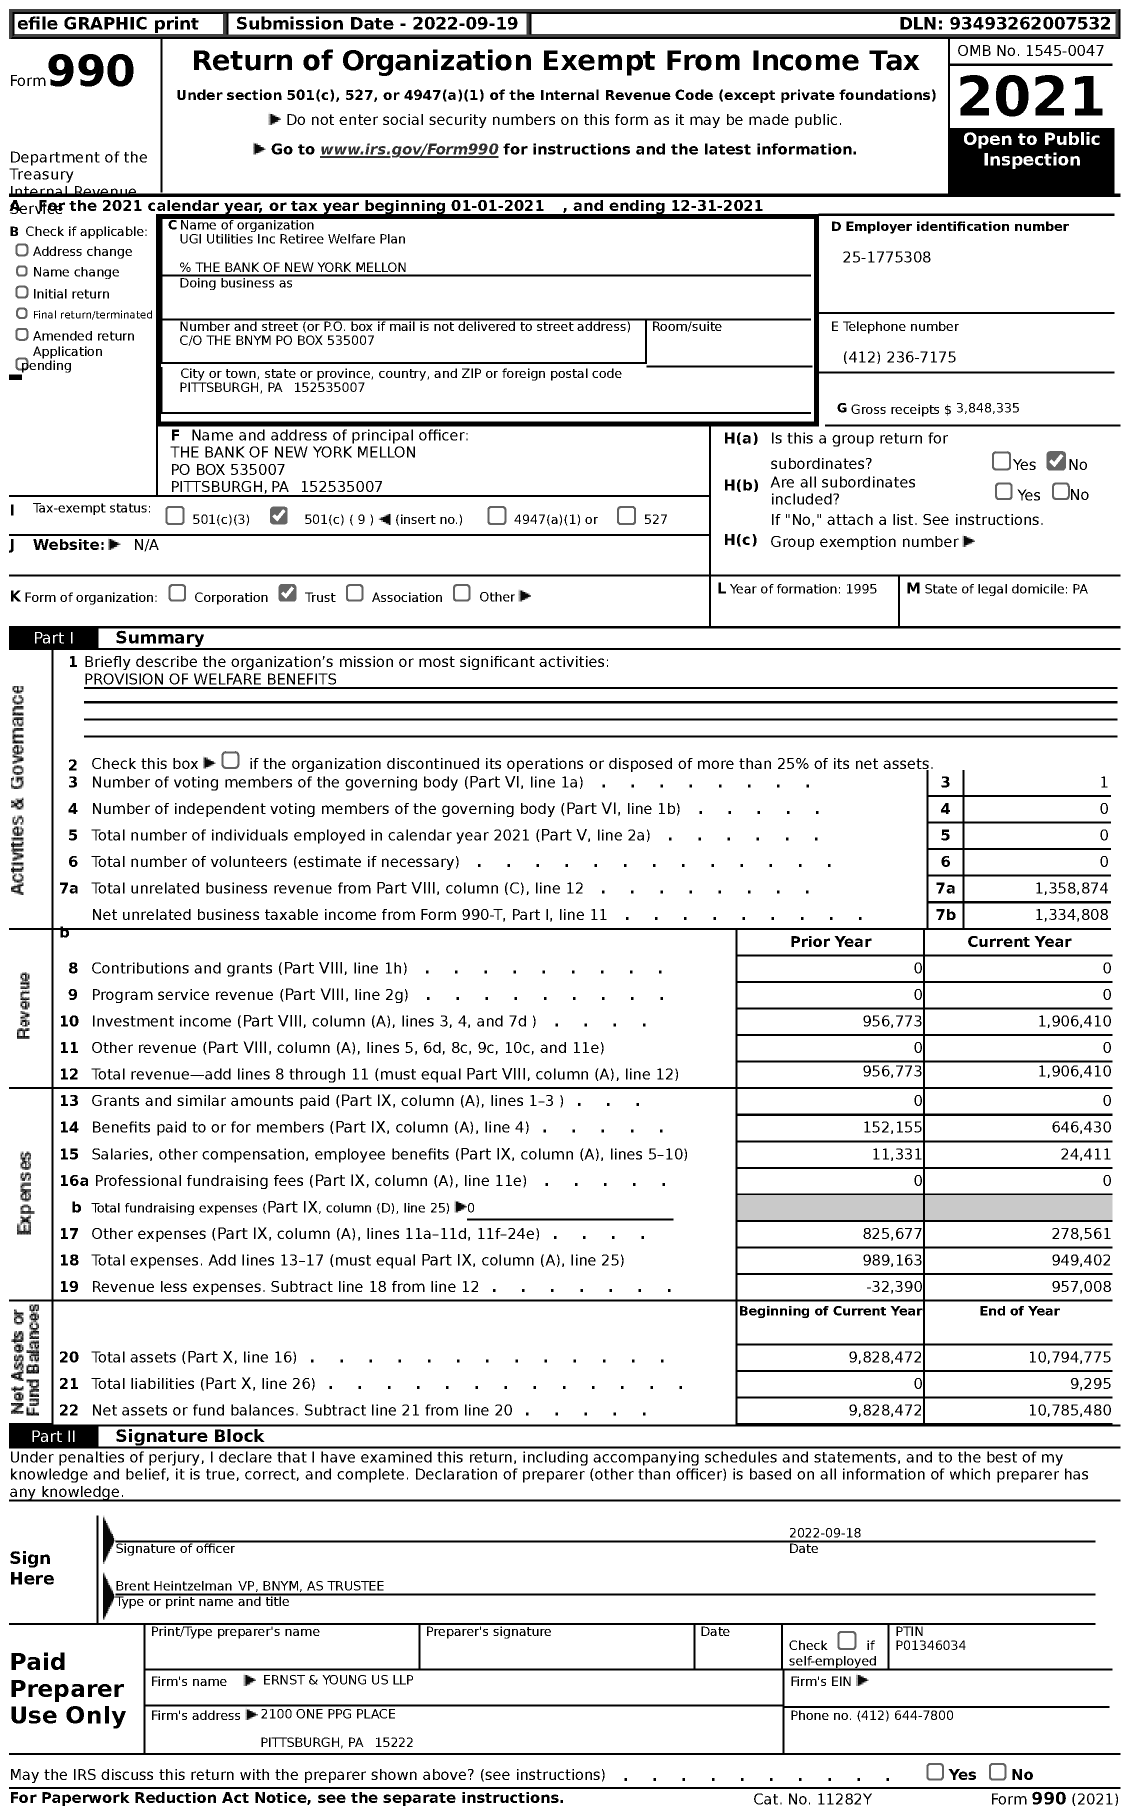 Image of first page of 2021 Form 990 for UGI Utilities Inc Retiree Welfare Plan